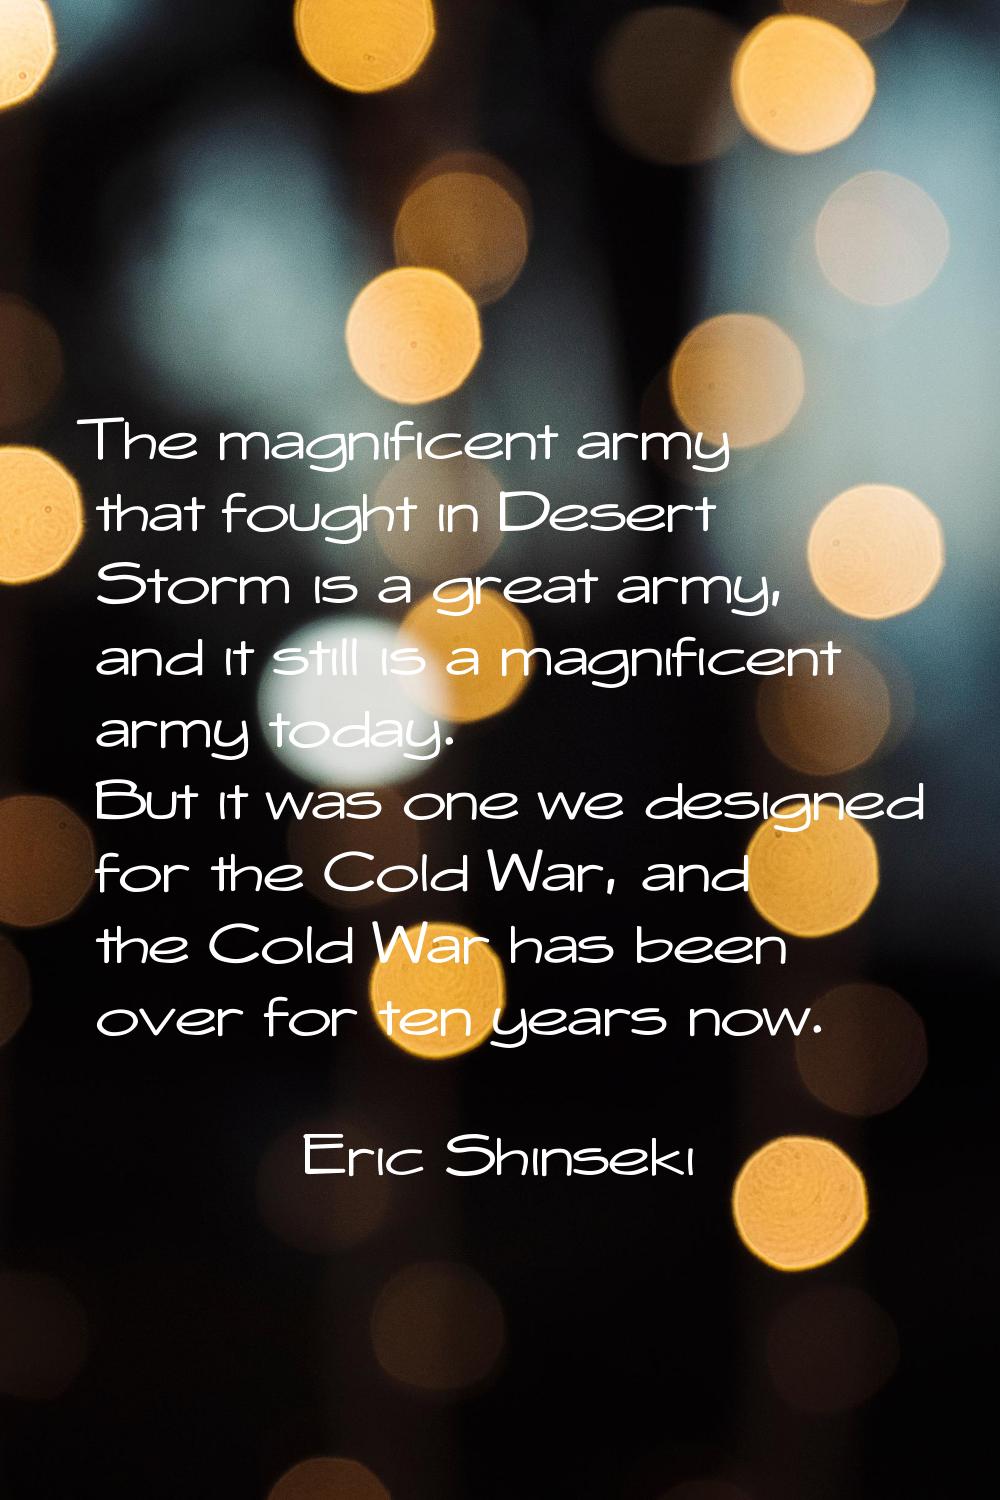 The magnificent army that fought in Desert Storm is a great army, and it still is a magnificent arm